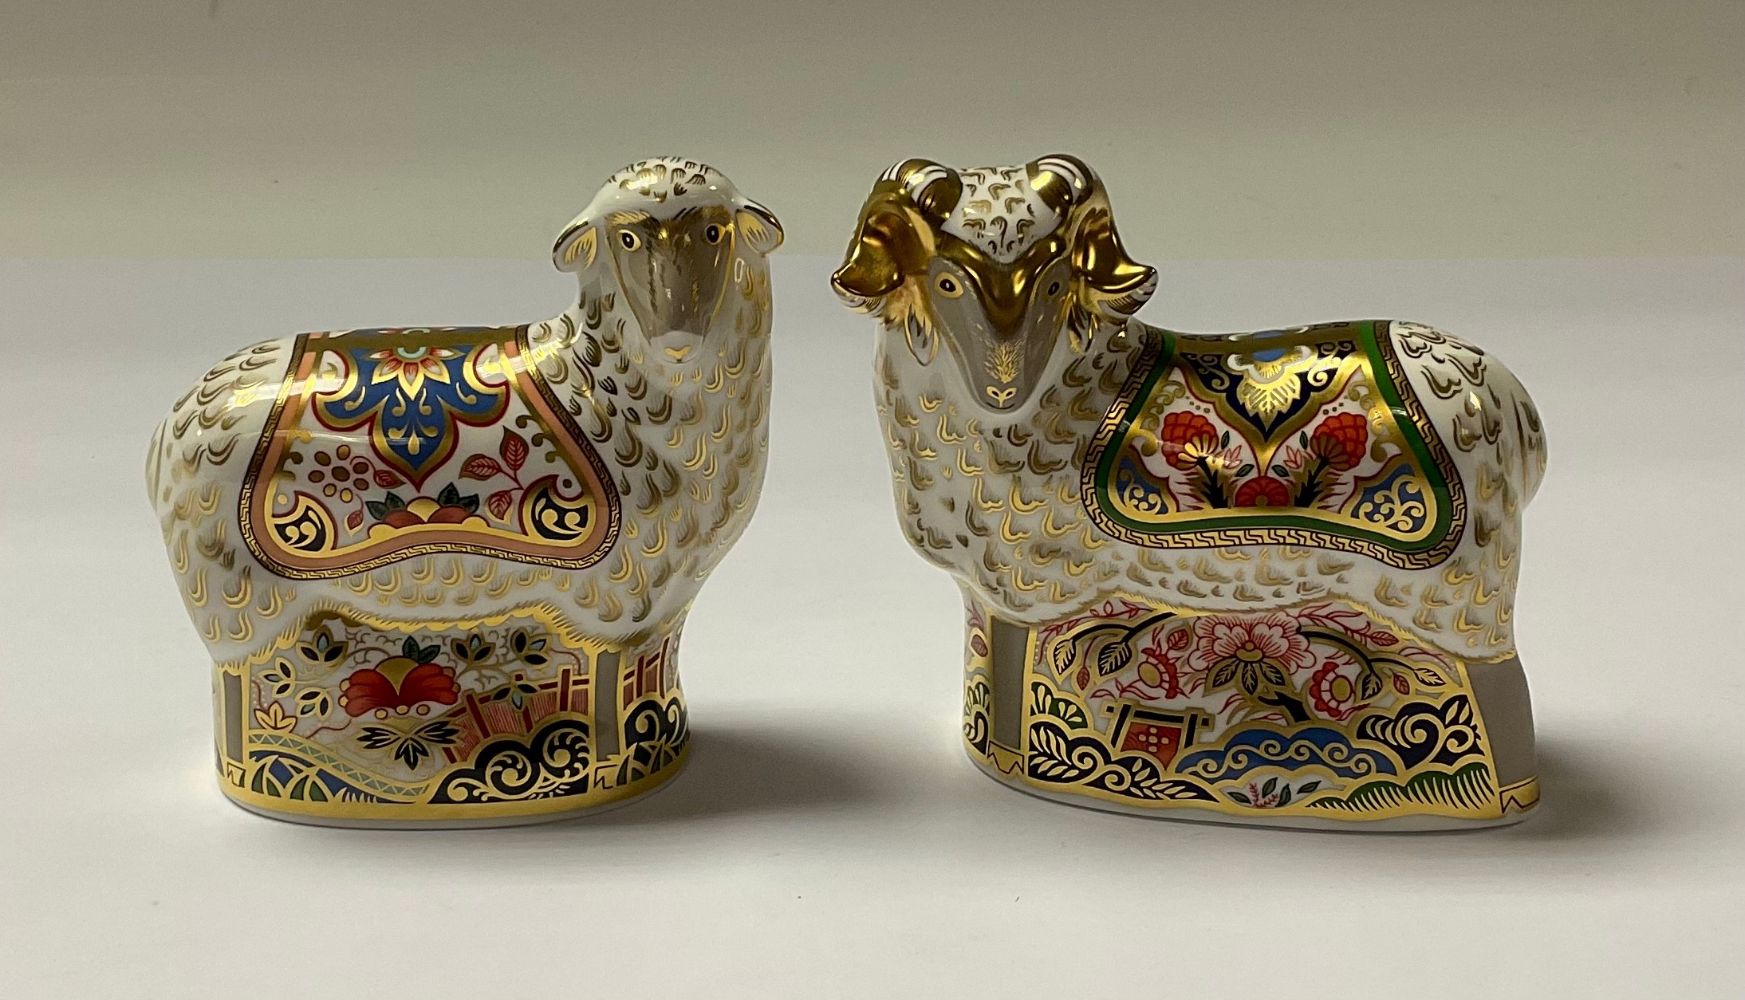 The Royal Crown Derby Guild Auction of Paperweights